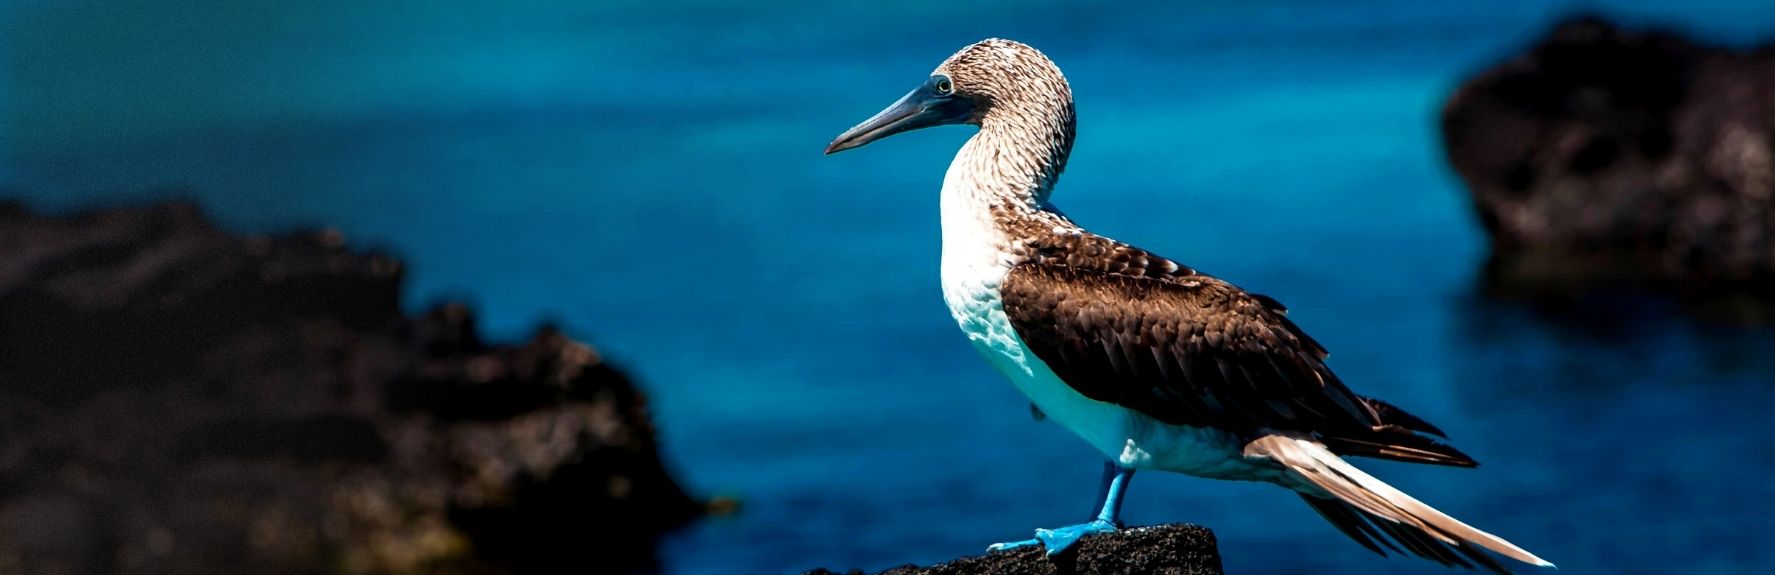 8 Day Galapagos Island Hopping Classic